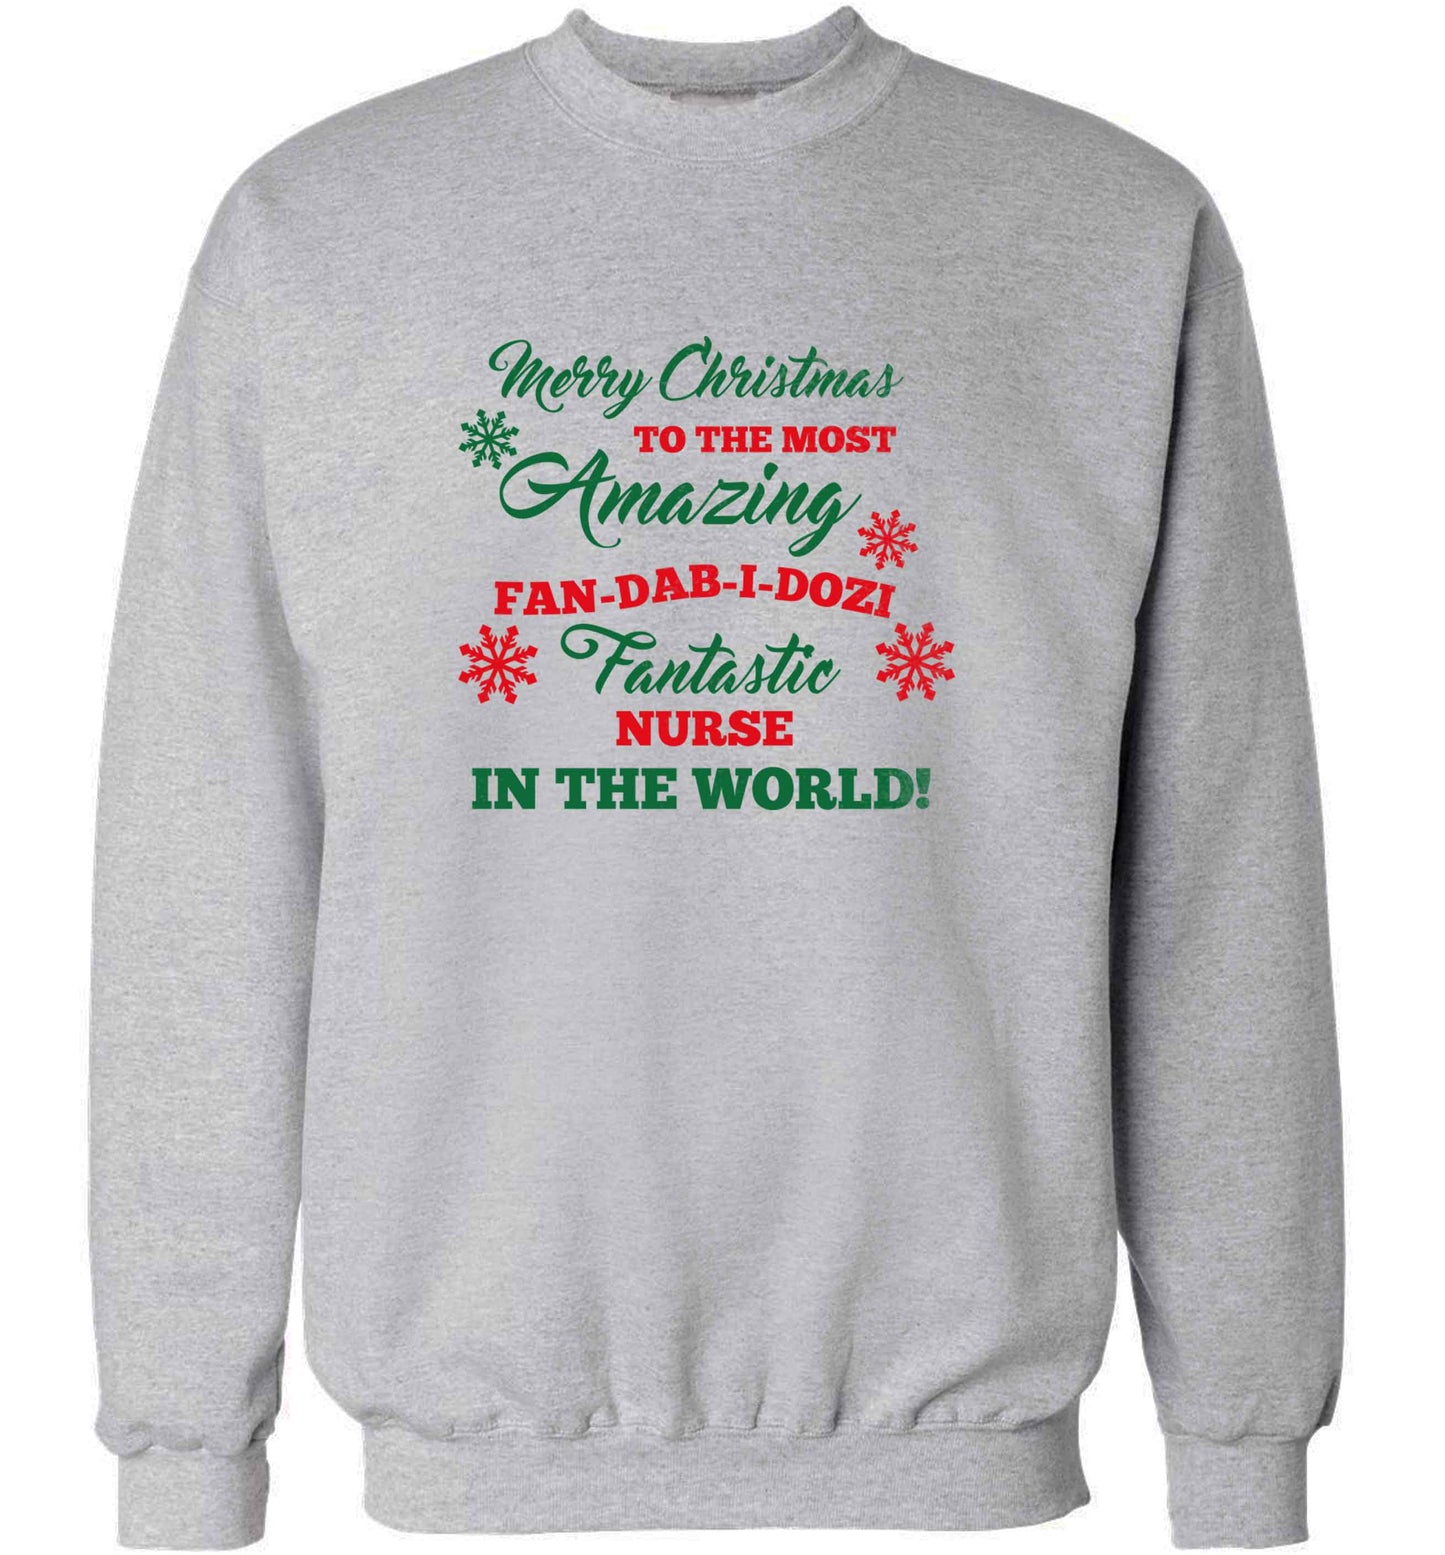 Merry Christmas to the most amazing nurse in the world! adult's unisex grey sweater 2XL